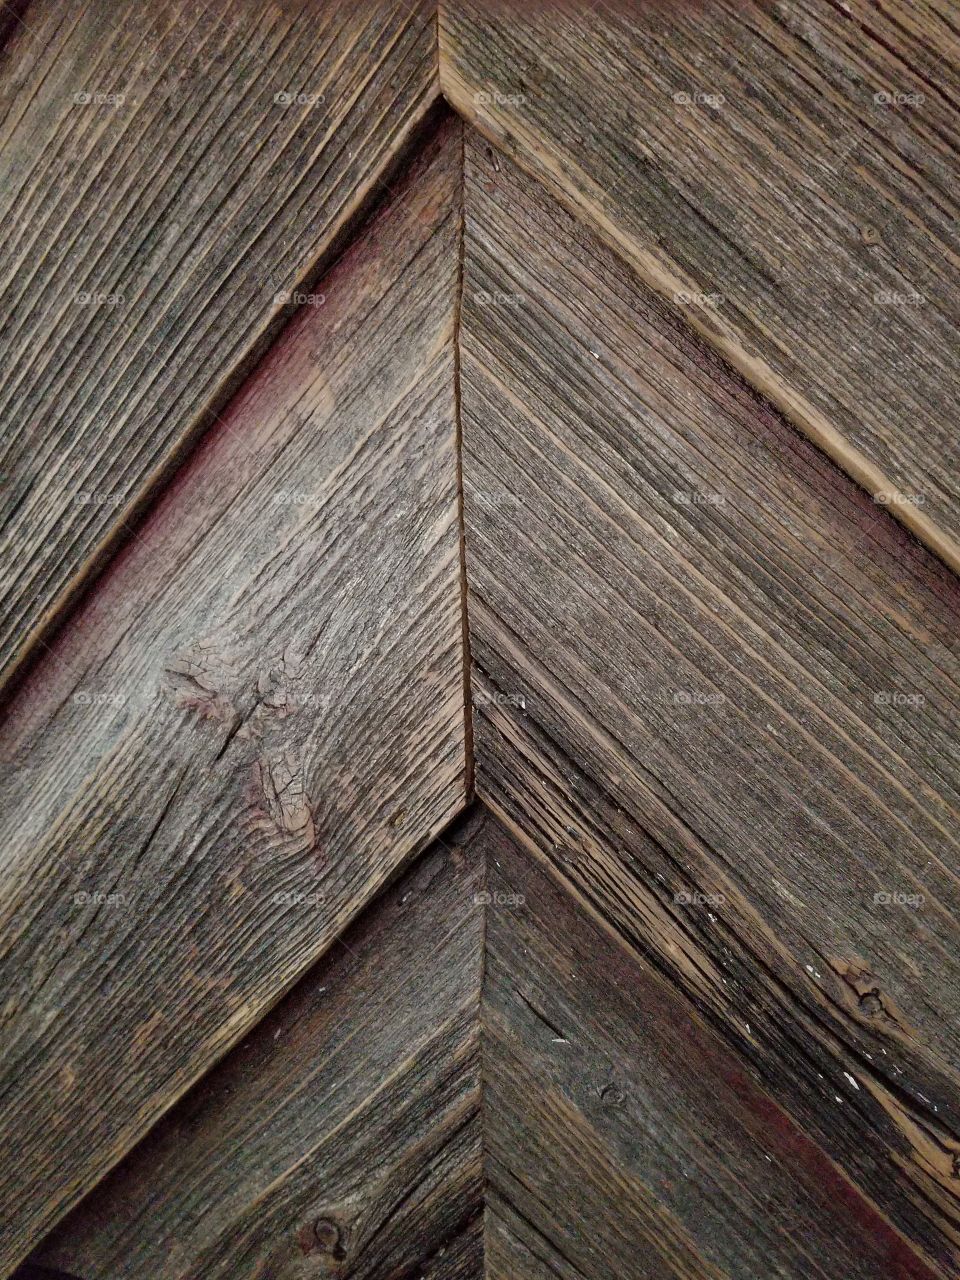 Gorgeous hand crafted natural barn board in a chevron pattern made by a skilled Woodworker.